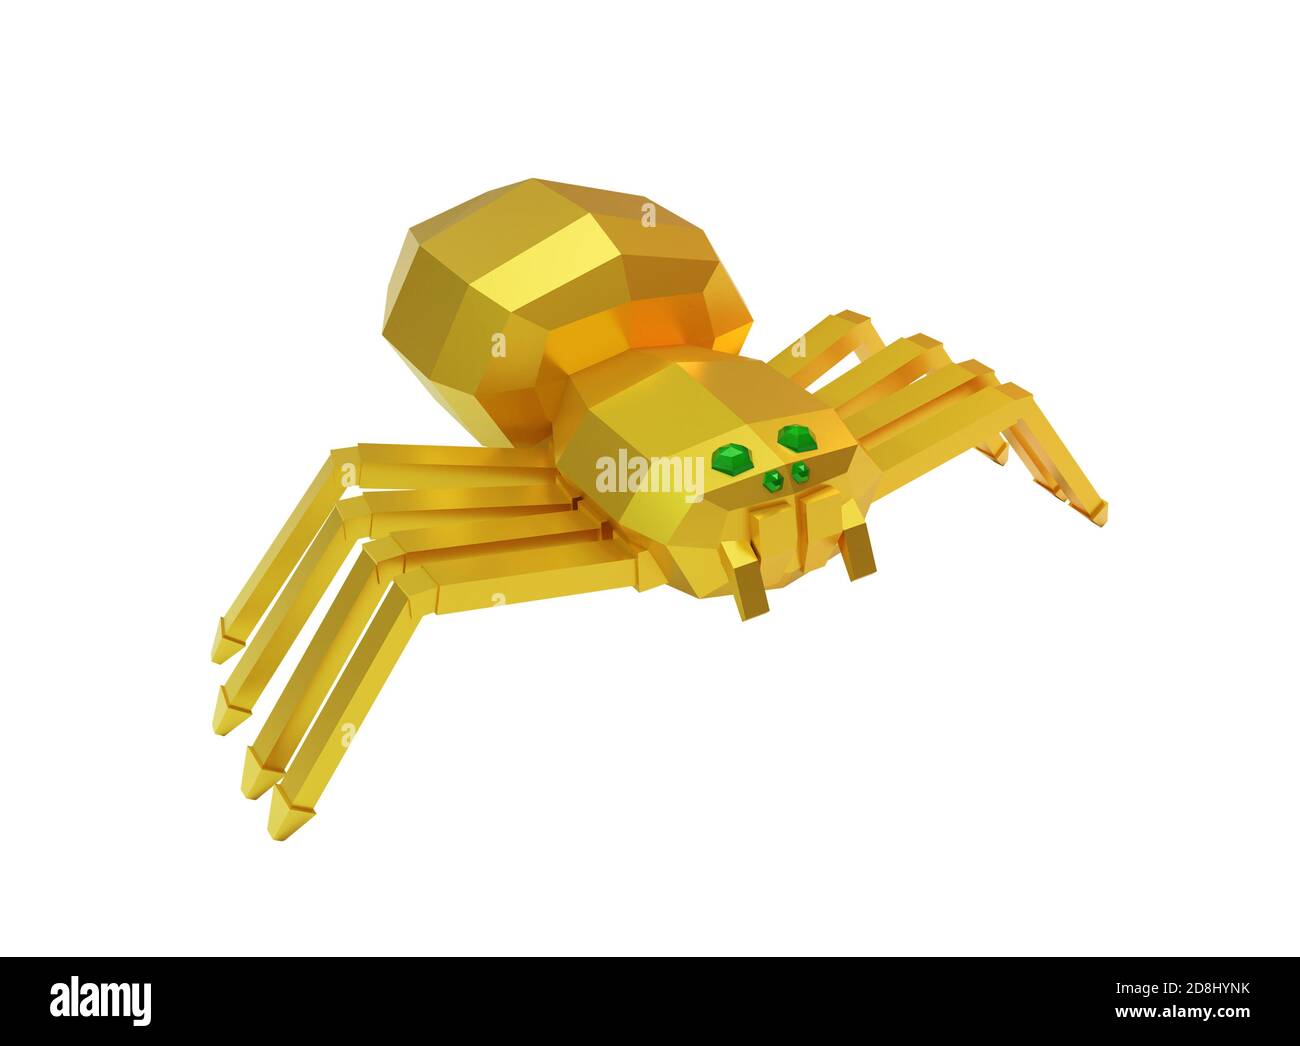 39 Spider Time Lapse Images, Stock Photos, 3D objects, & Vectors